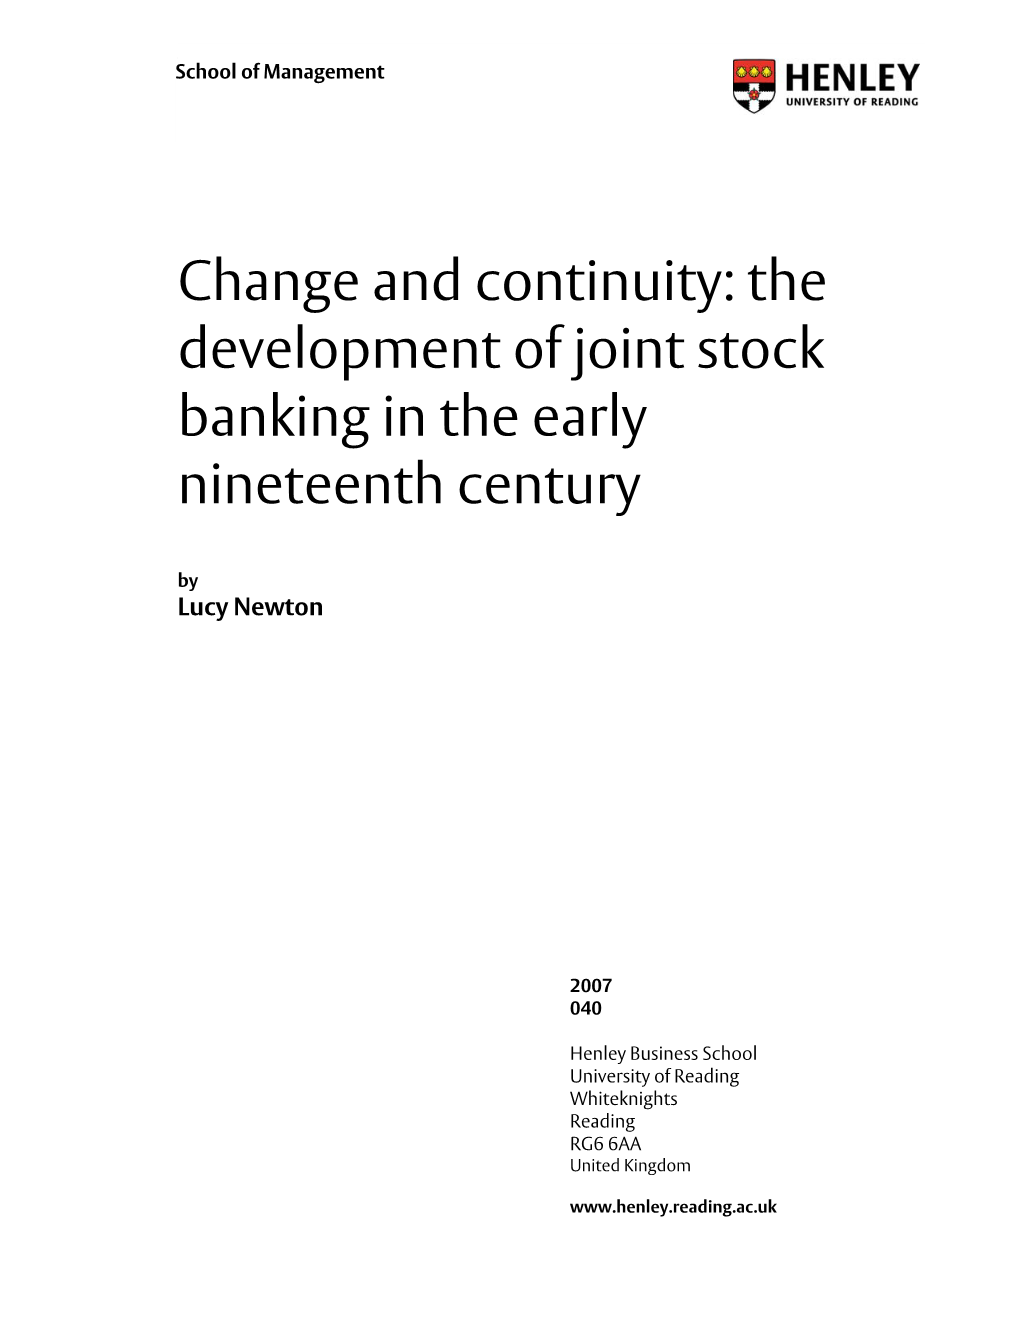 The Development of Joint Stock Banking in the Early Nineteenth Century